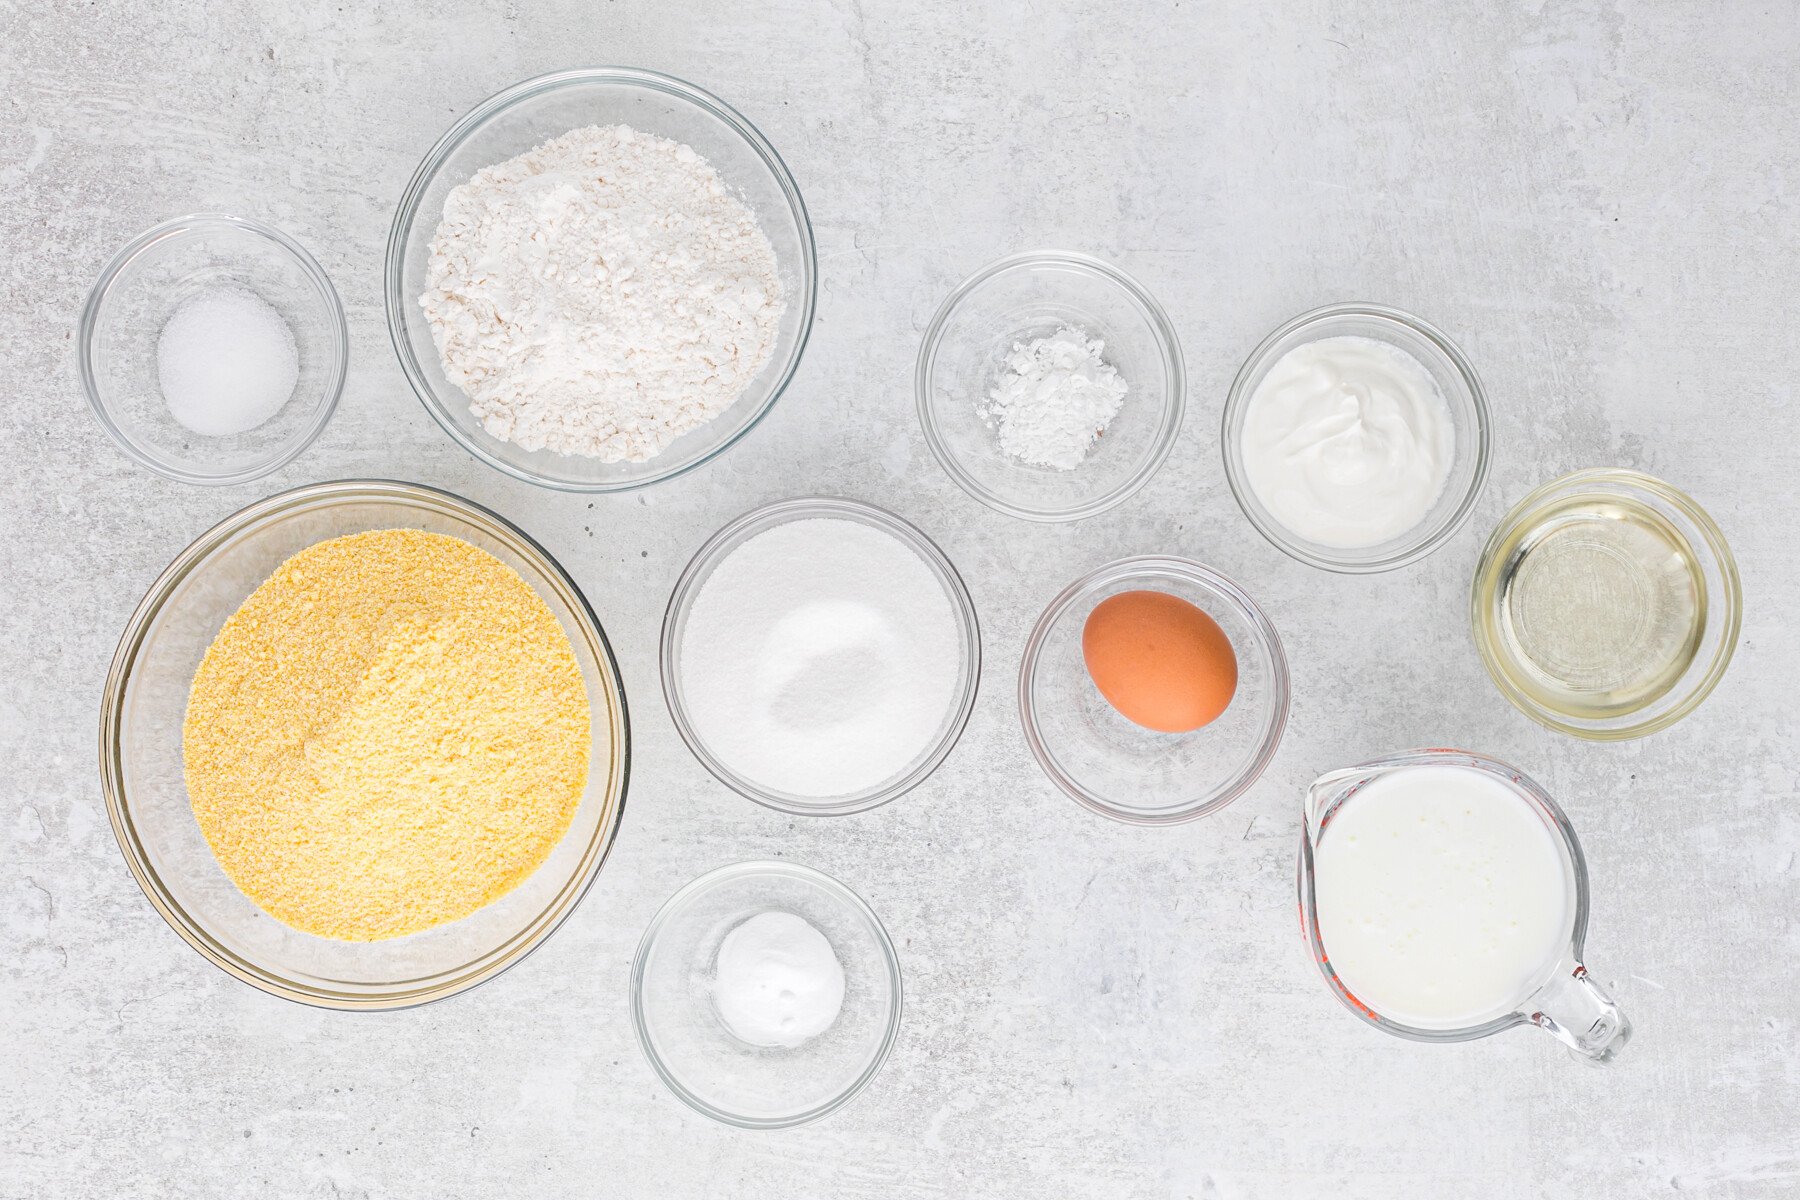 Cornmeal, flour, sugar, egg, leavening, oil and buttermilk in glass bowls on a gray background